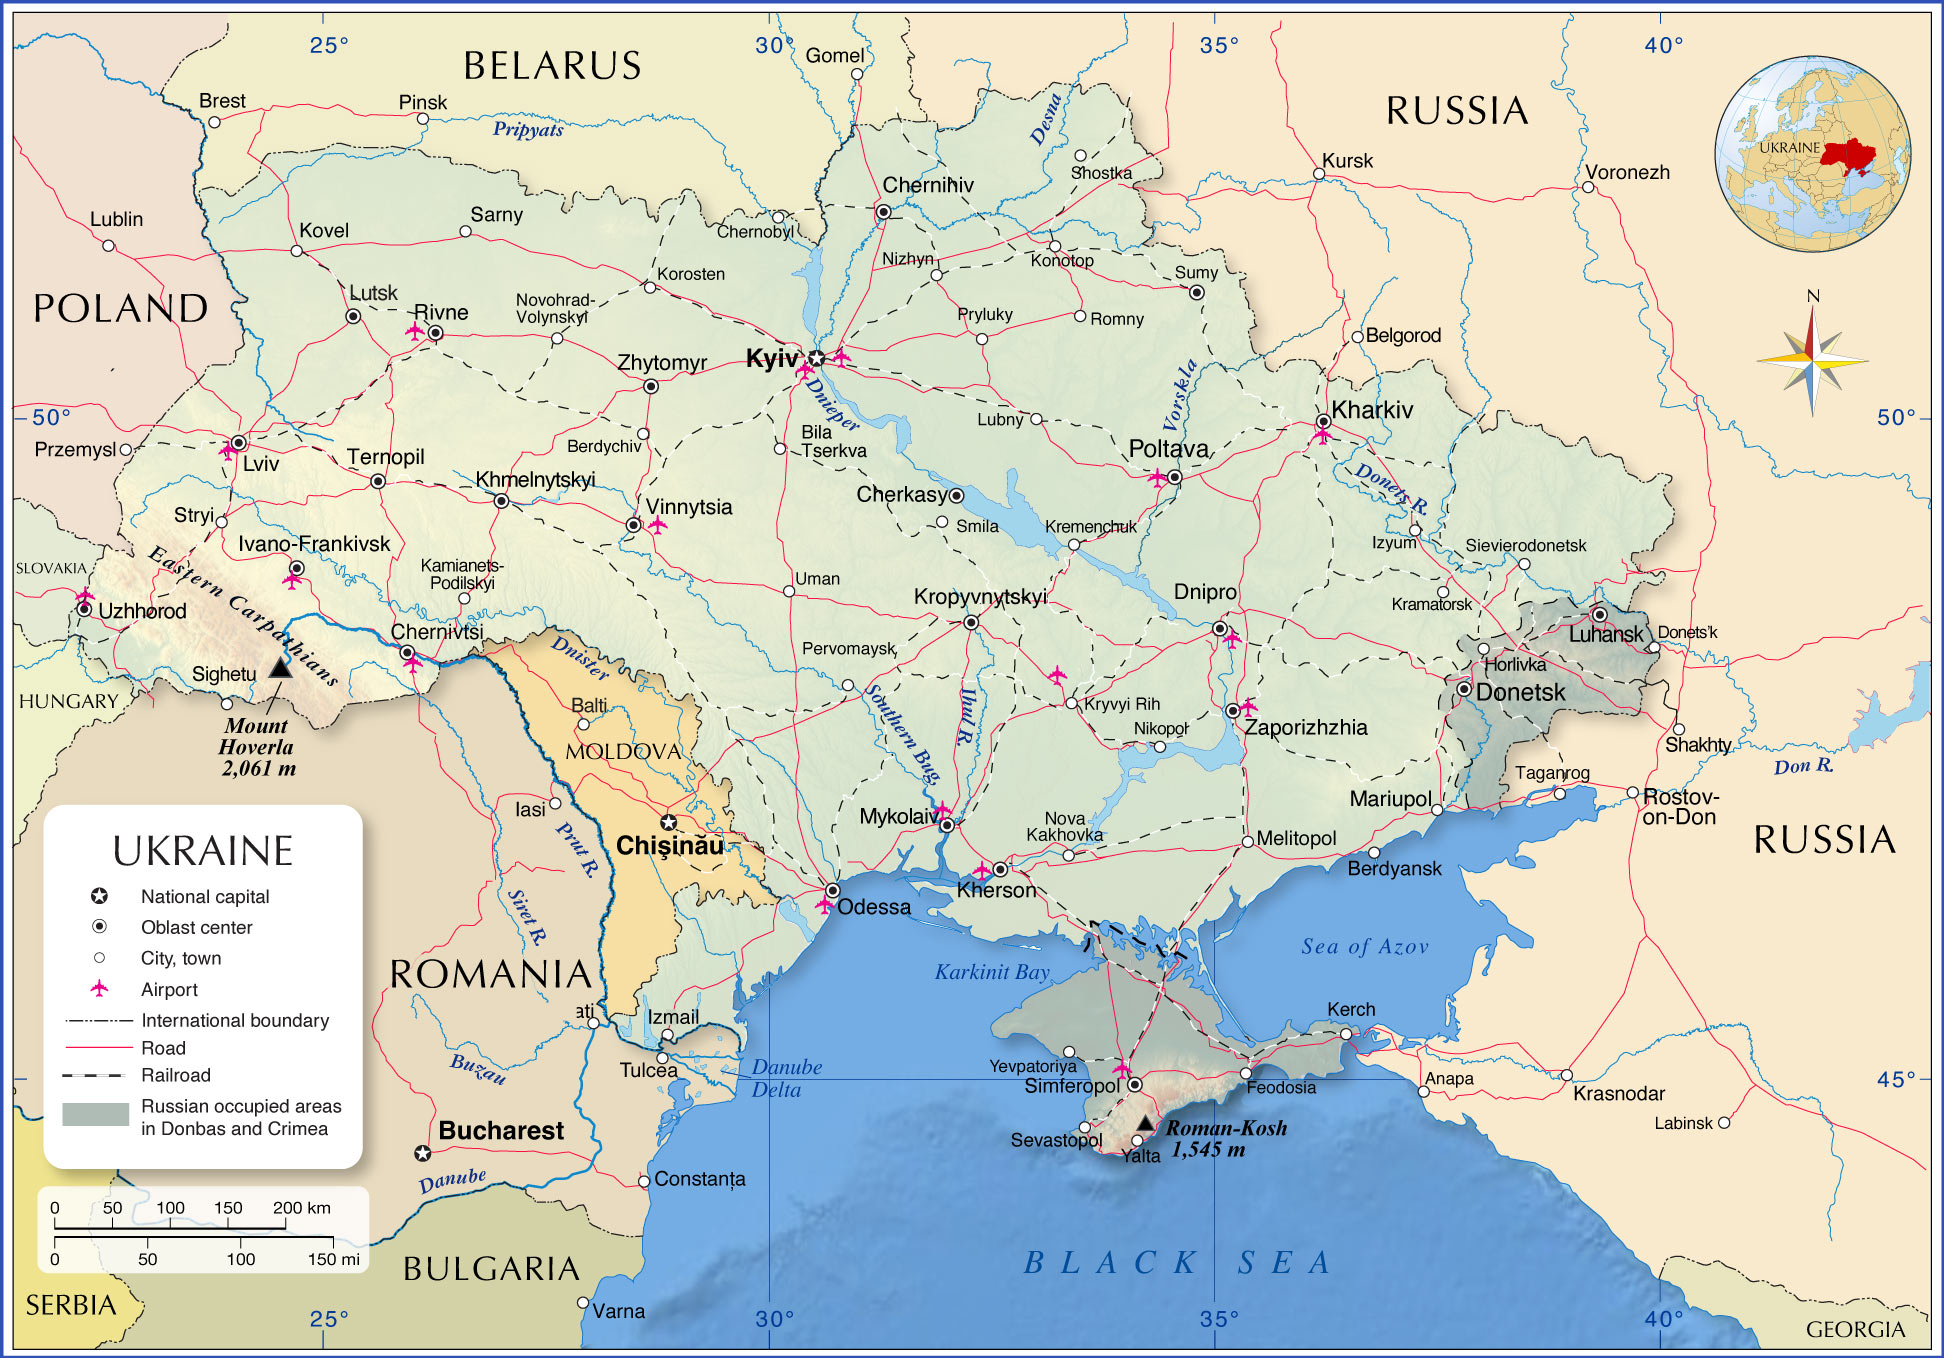 Political Map of Ukraine with Crimea and Eastern Ukraine under Russian control